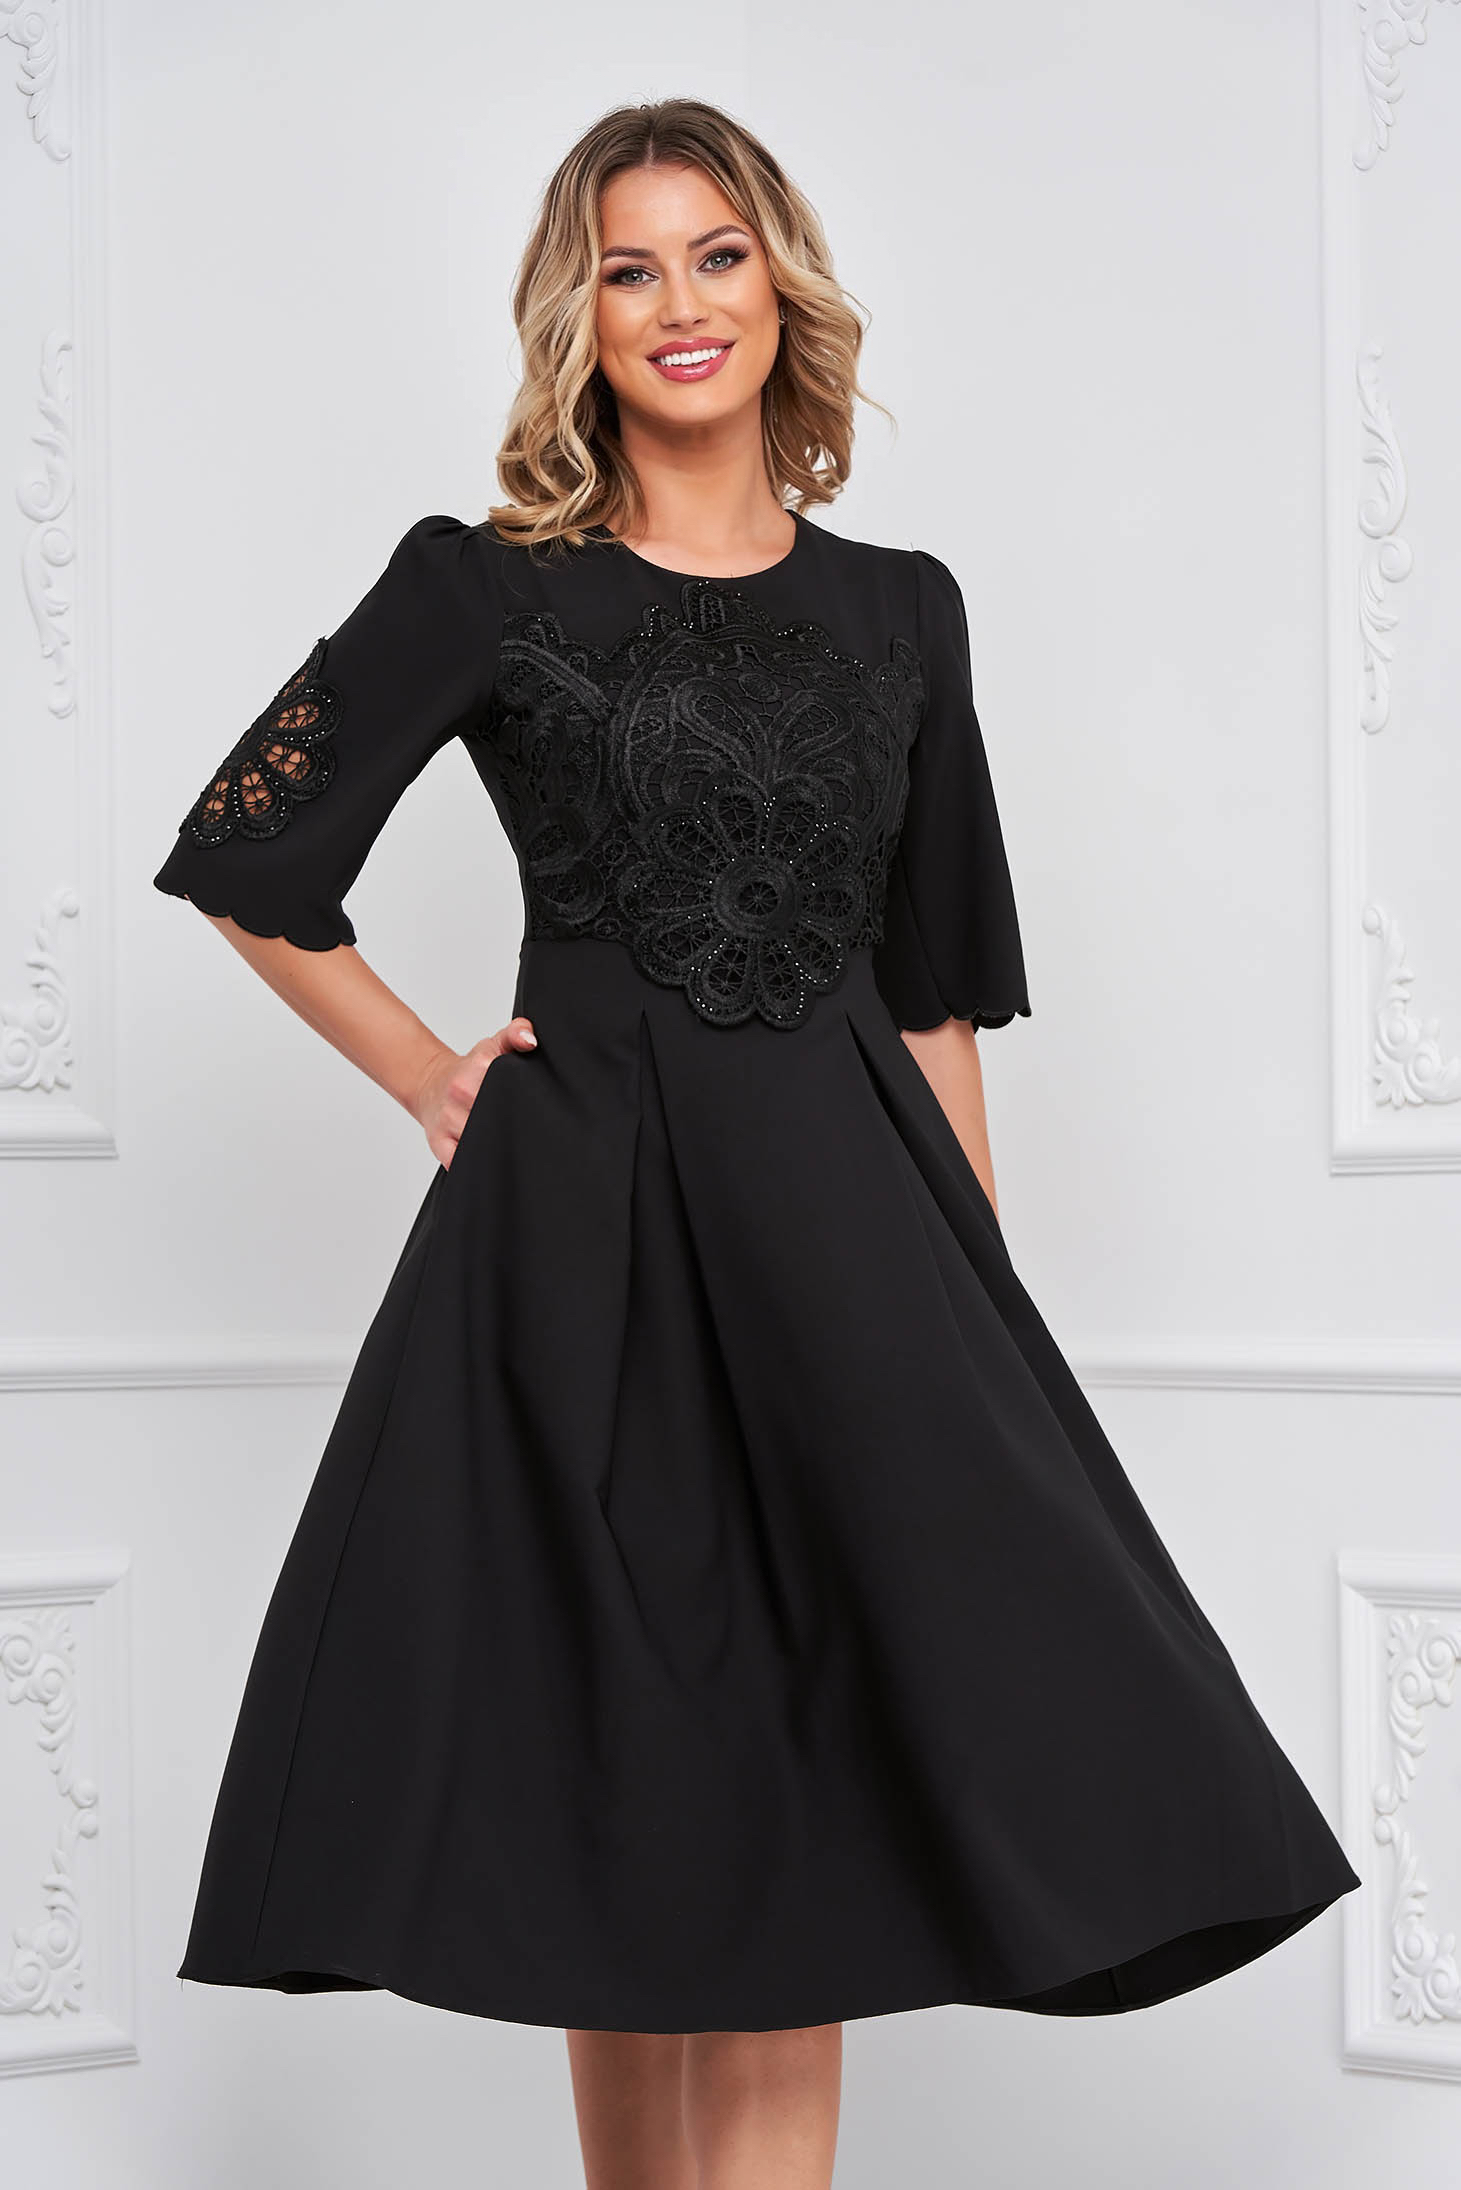 Black dress elastic cloth midi cloche with embroidery details with crystal embellished details